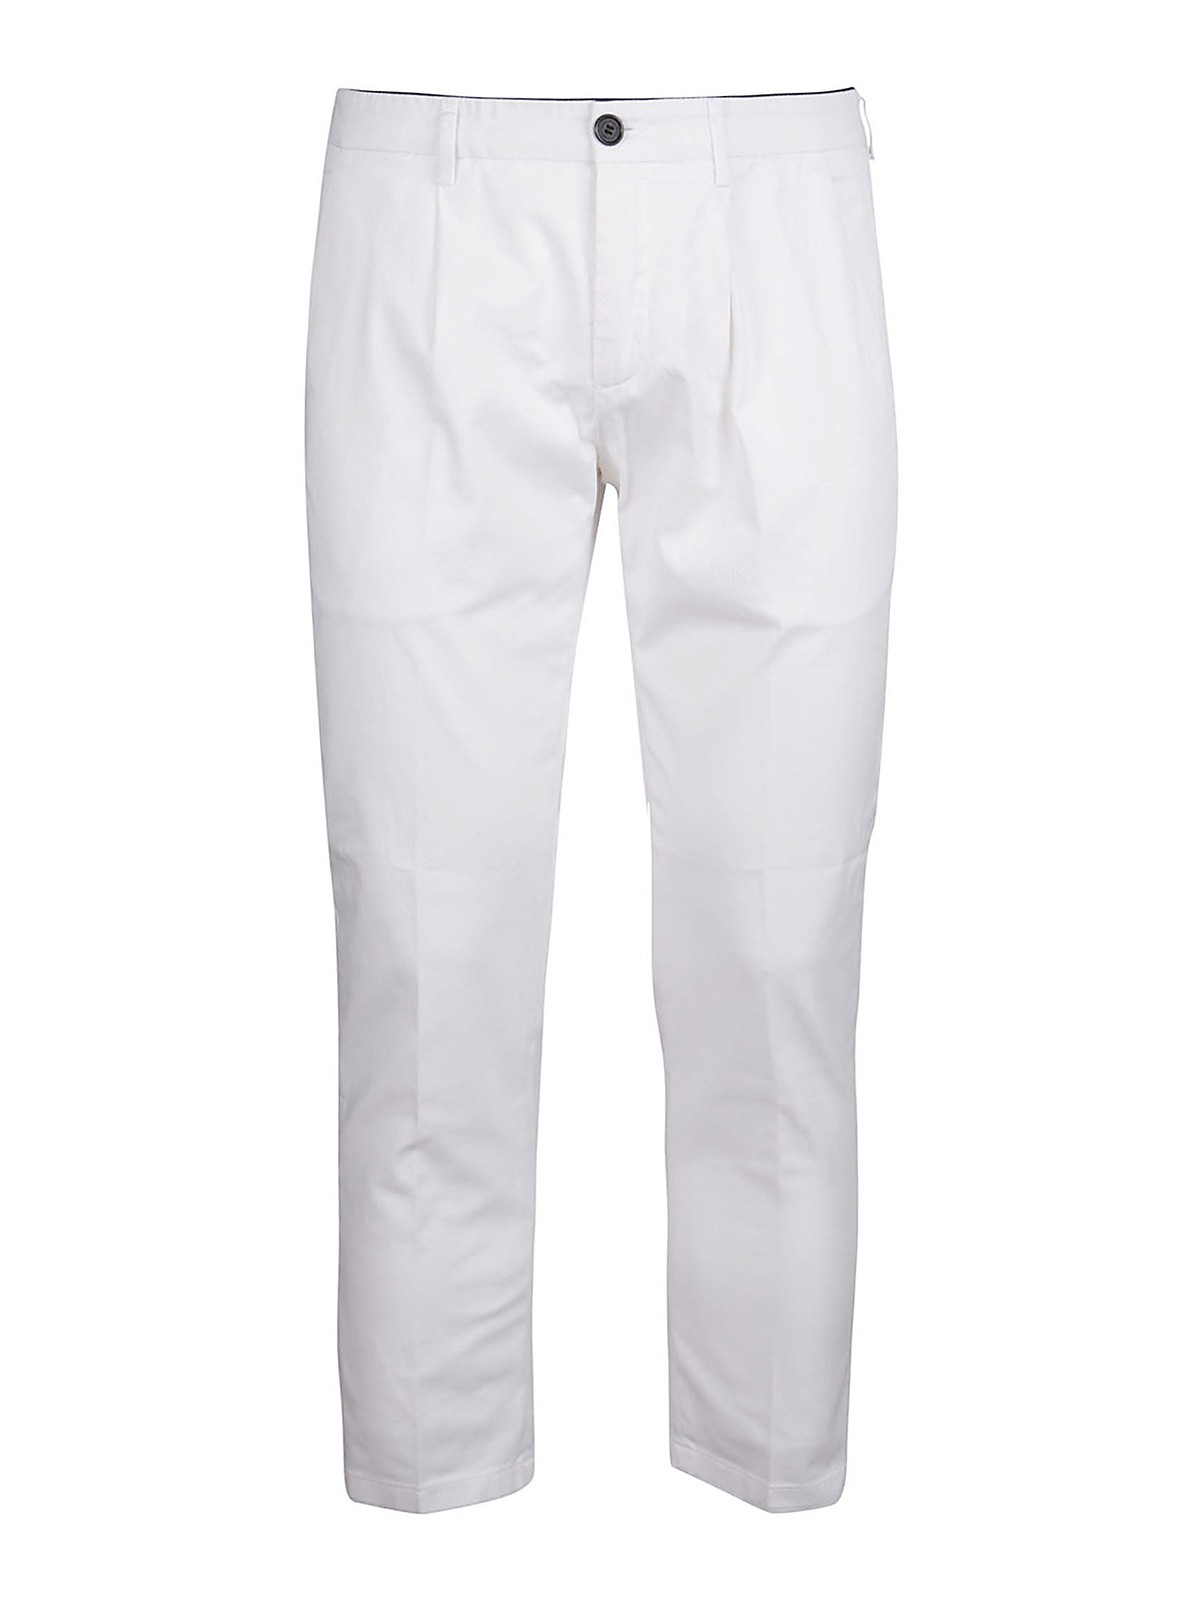 Department 5 Prince Cropped Pants In White